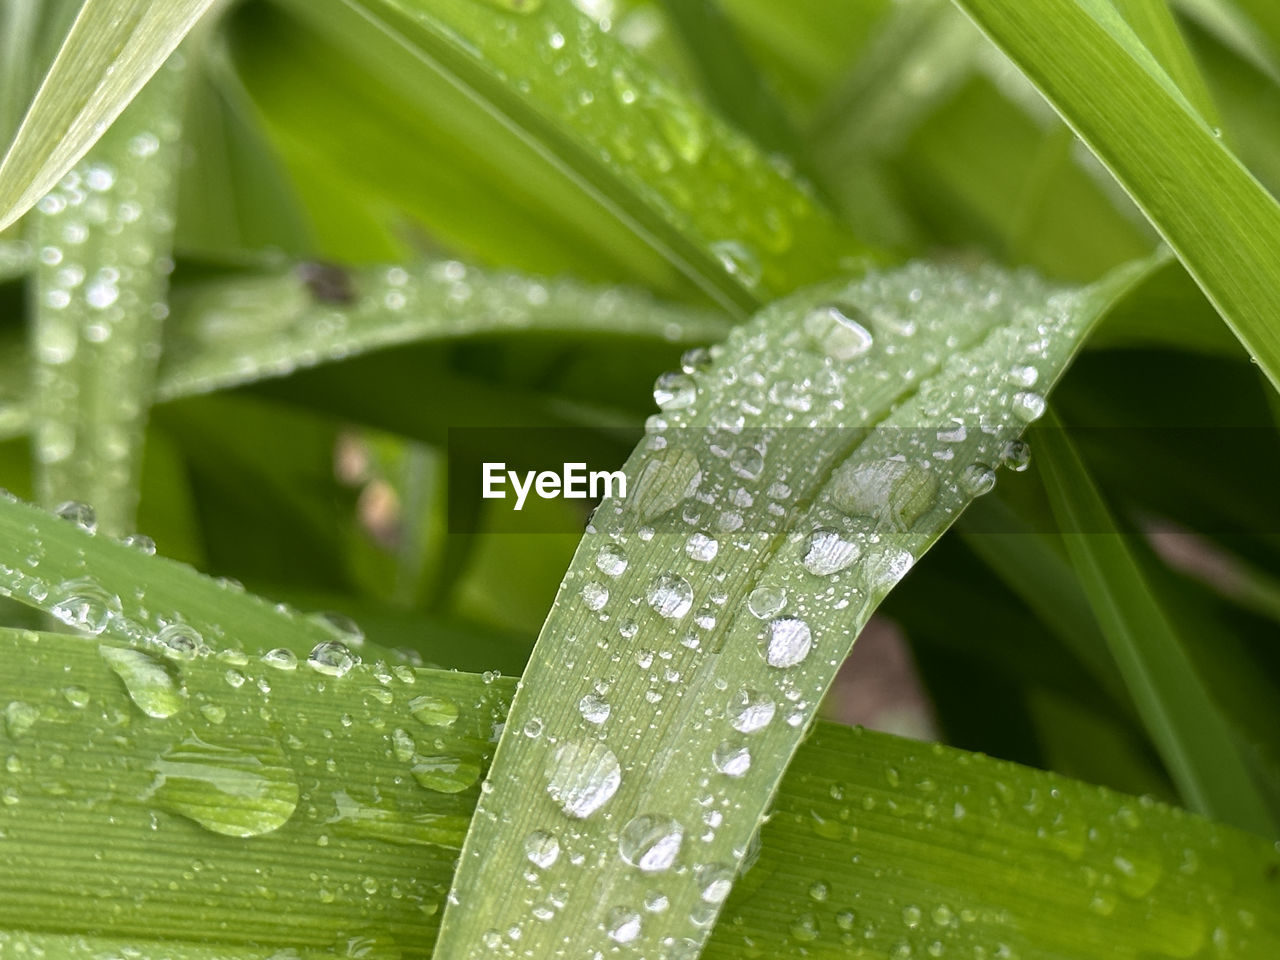 water, drop, wet, leaf, plant, plant part, moisture, green, dew, nature, close-up, beauty in nature, macro photography, freshness, growth, rain, no people, grass, plant stem, flower, blade of grass, outdoors, environment, tropical climate, purity, raindrop